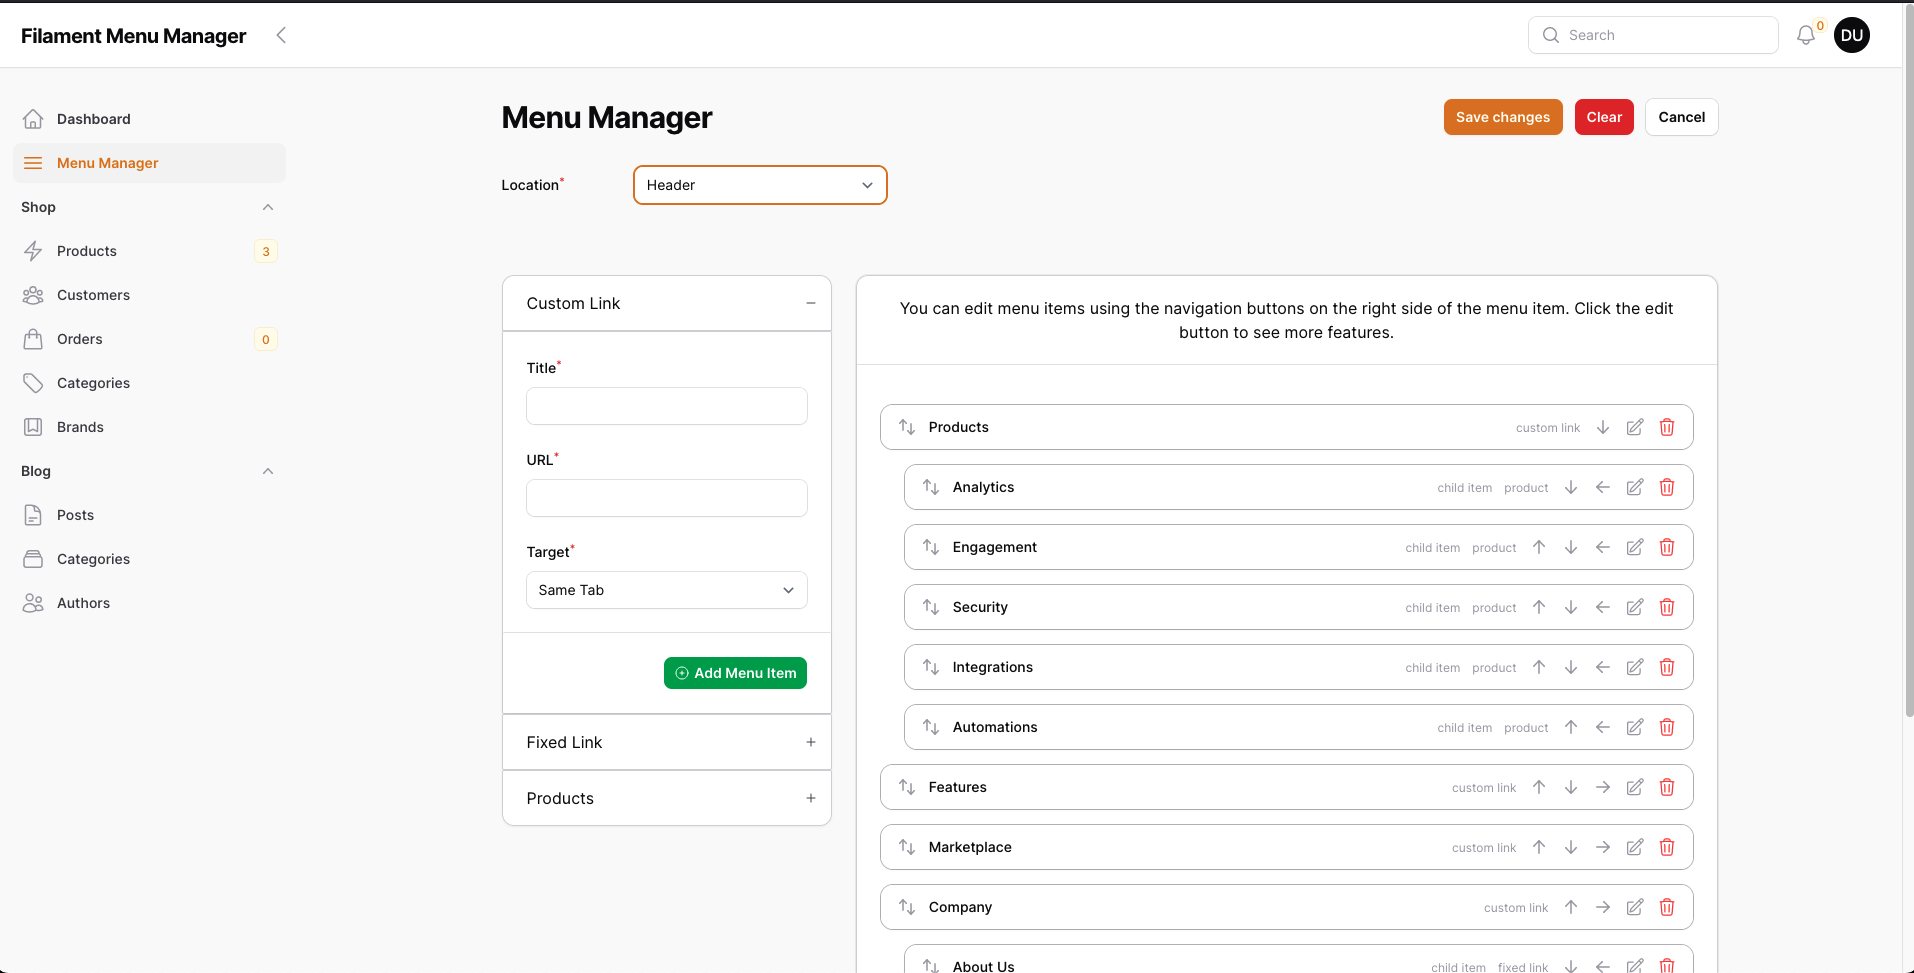 Menu Manager Page